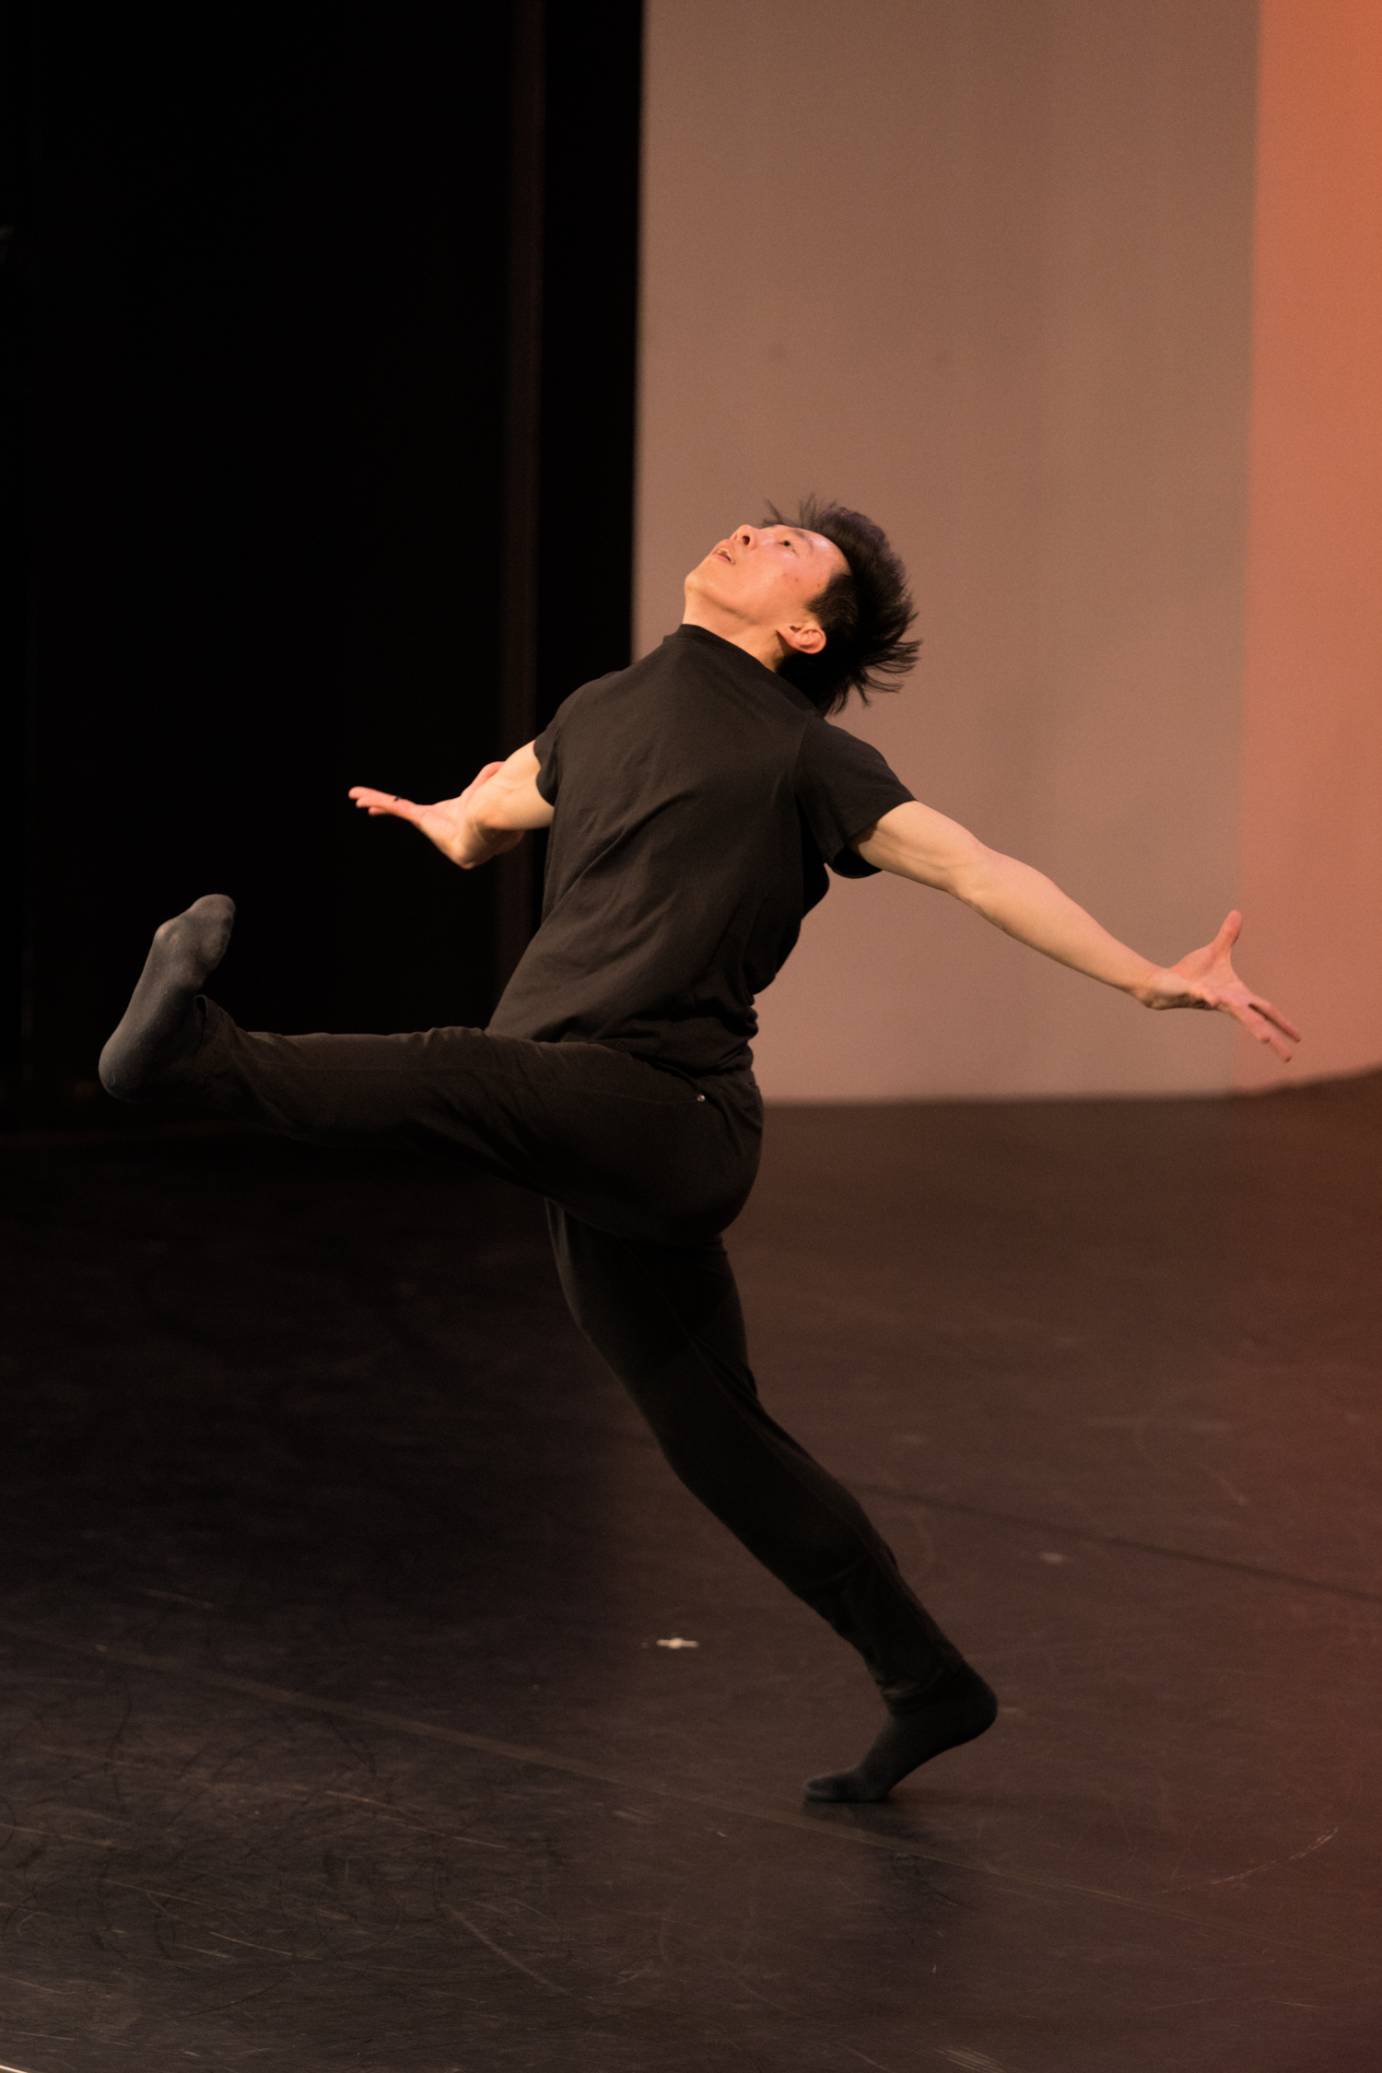 Dancer with one leg extended in the air in front of him, arms outstretched